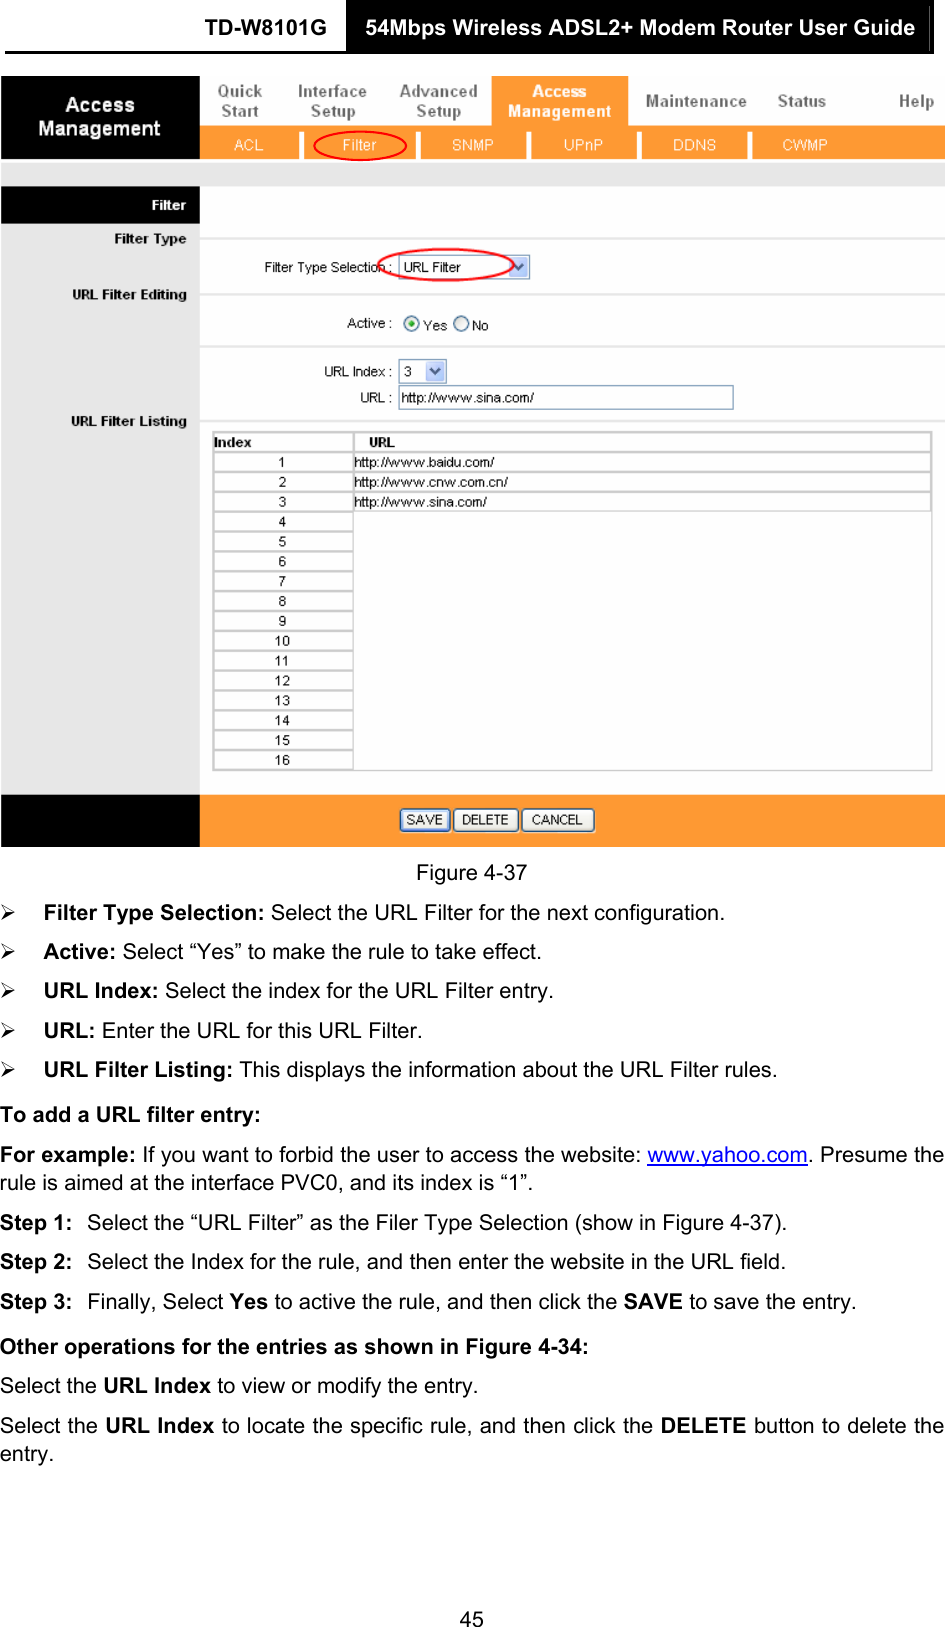 TD-W8101G  54Mbps Wireless ADSL2+ Modem Router User Guide  45 Figure 4-37 ¾ Filter Type Selection: Select the URL Filter for the next configuration. ¾ Active: Select “Yes” to make the rule to take effect. ¾ URL Index: Select the index for the URL Filter entry. ¾ URL: Enter the URL for this URL Filter. ¾ URL Filter Listing: This displays the information about the URL Filter rules. To add a URL filter entry: For example: If you want to forbid the user to access the website: www.yahoo.com. Presume the rule is aimed at the interface PVC0, and its index is “1”. Step 1:  Select the “URL Filter” as the Filer Type Selection (show in Figure 4-37). Step 2:  Select the Index for the rule, and then enter the website in the URL field. Step 3:  Finally, Select Yes to active the rule, and then click the SAVE to save the entry. Other operations for the entries as shown in Figure 4-34: Select the URL Index to view or modify the entry. Select the URL Index to locate the specific rule, and then click the DELETE button to delete the entry.  